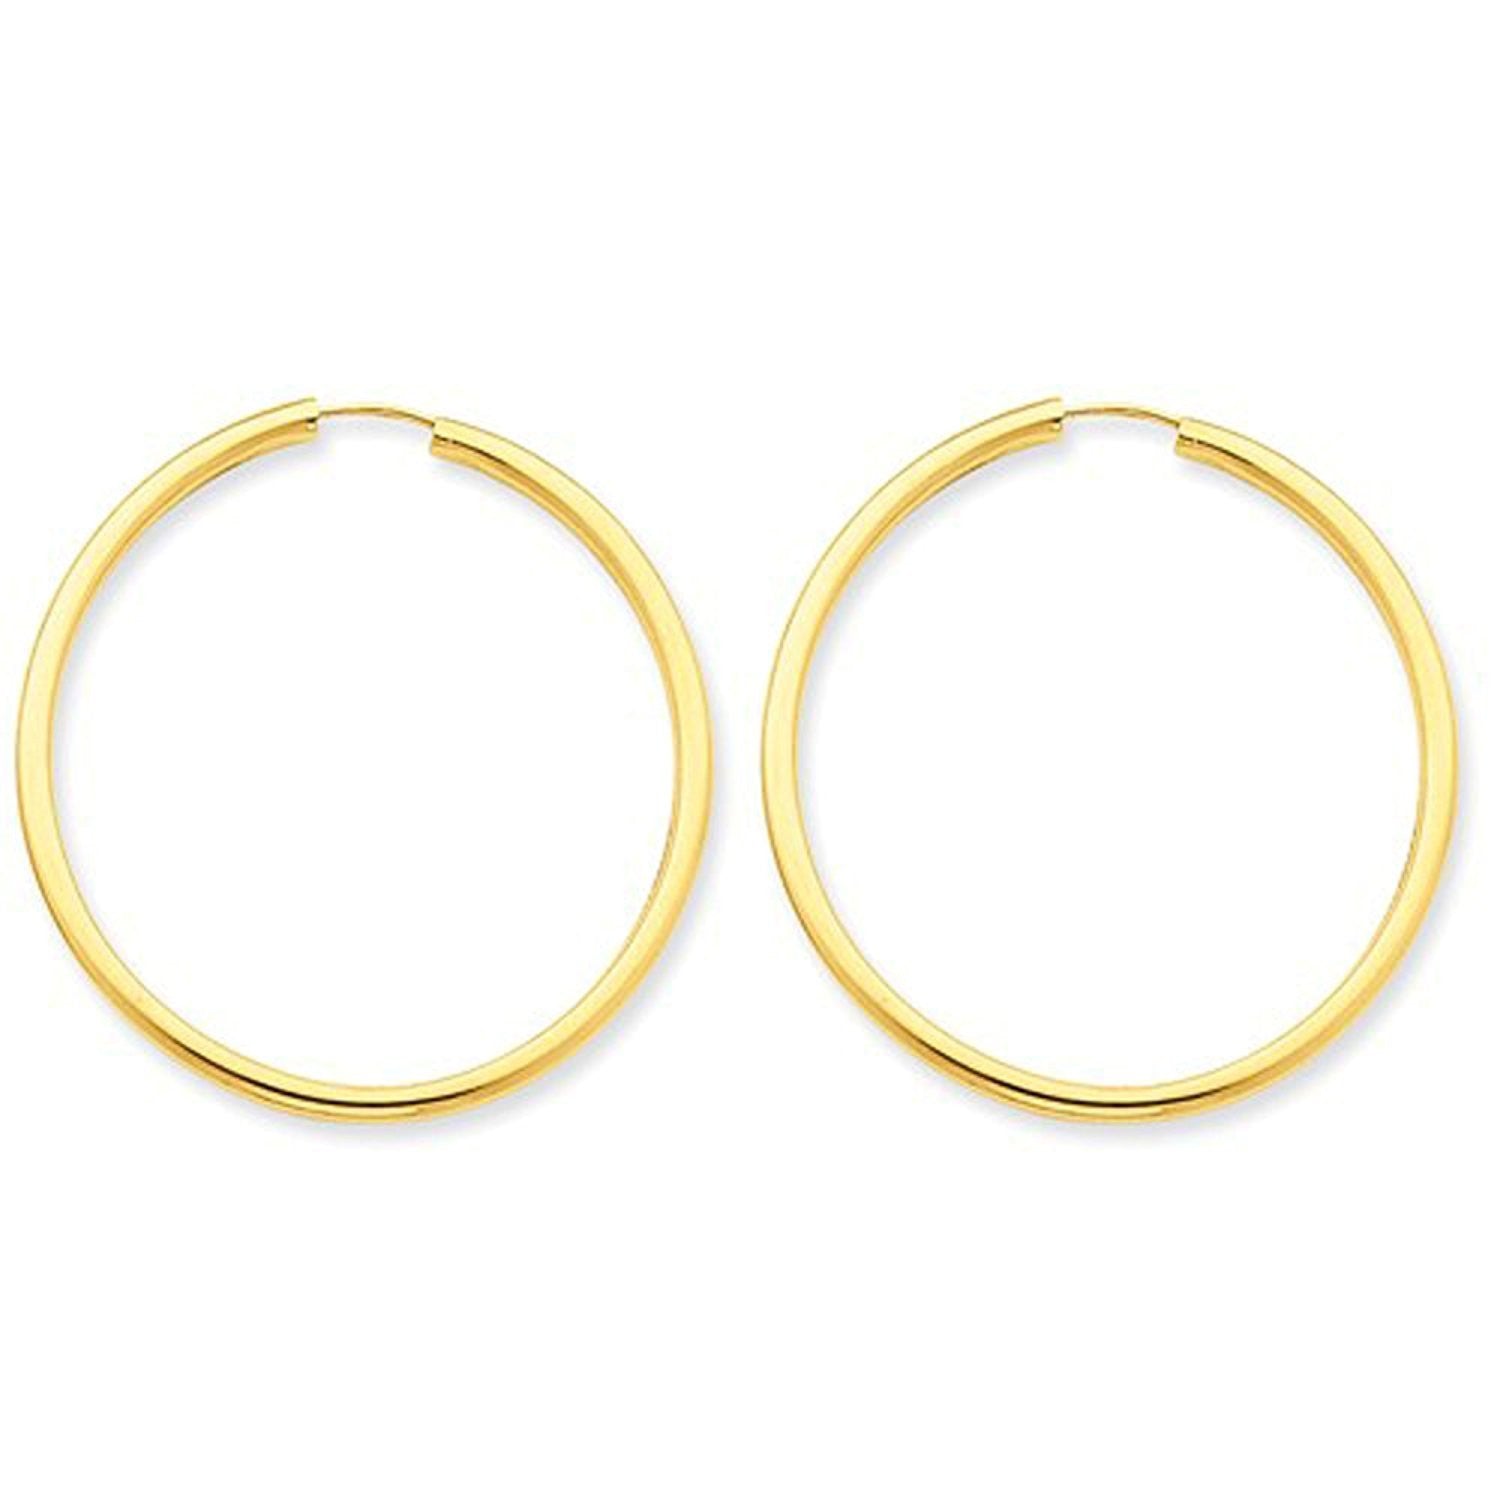 14K Yellow Gold 33mm x 2mm Round Endless Hoop Earrings